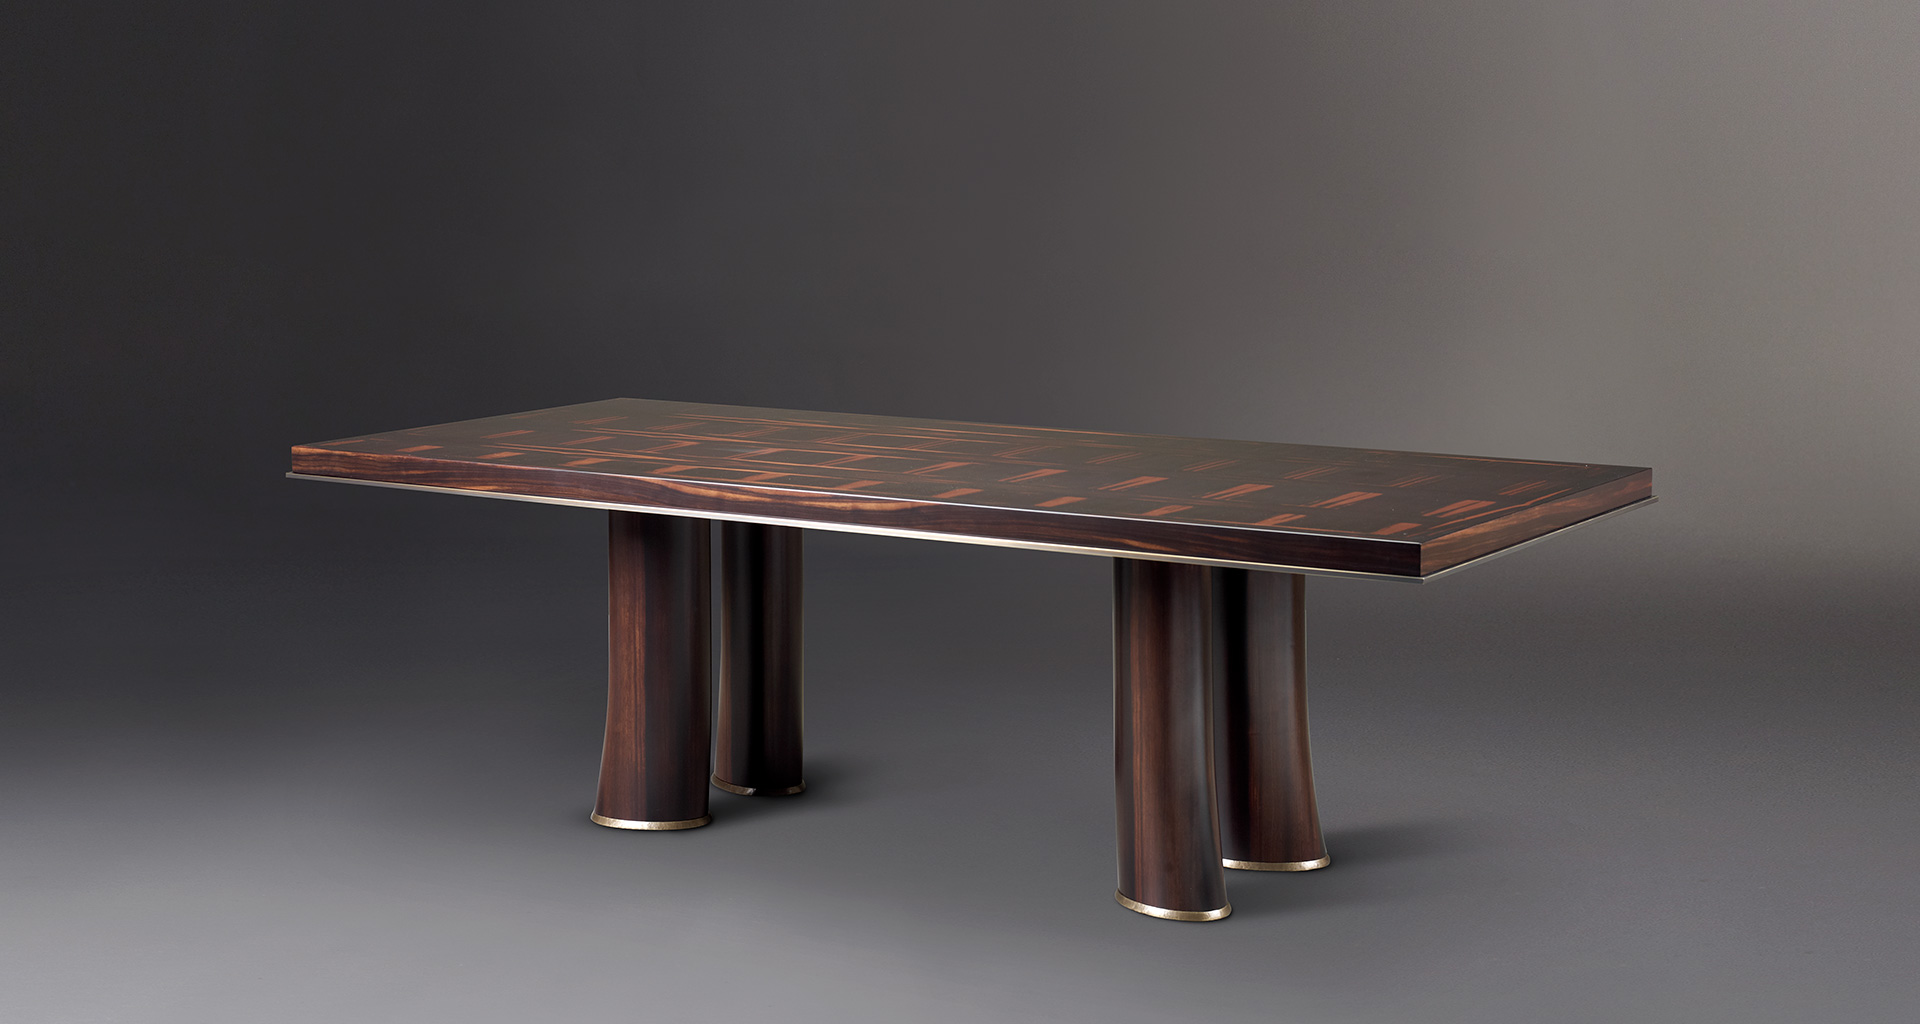 Andalù is a wooden dining table with bronze profile and feet, from Promemoria's catalogue | Promemoria